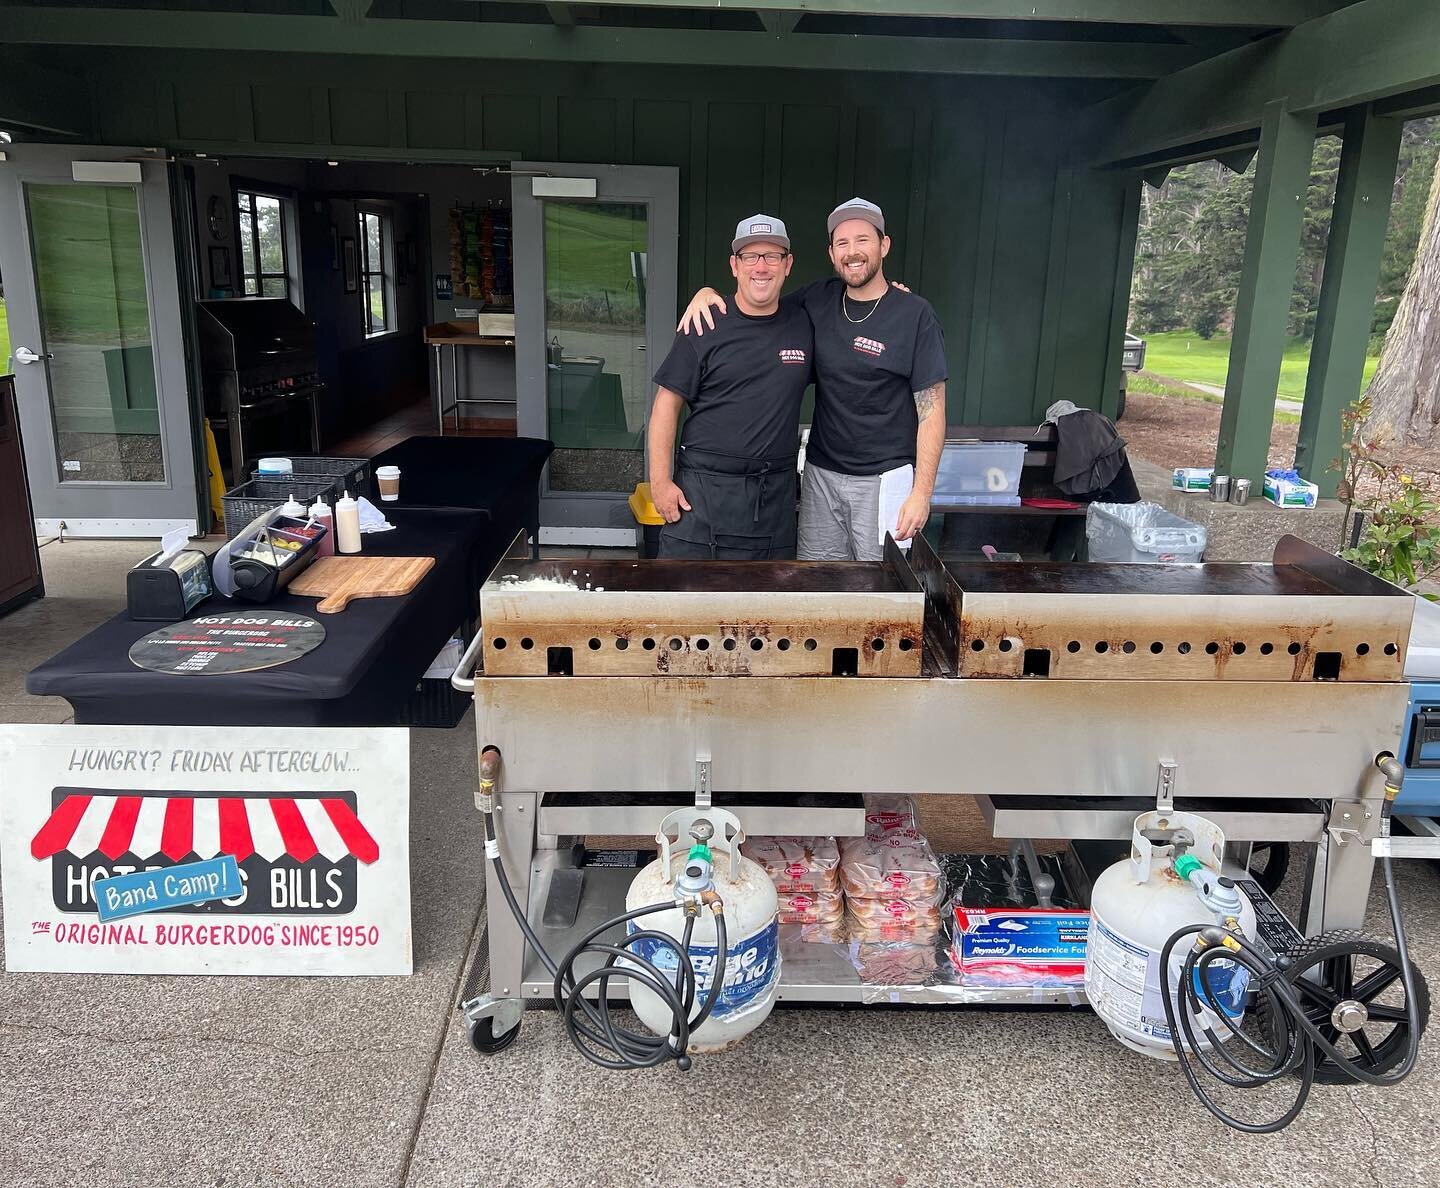 We are at @presidiogolfcourse today for the @theguardsmen open! Who's getting a Burgerdog today?! 

#burgerdog #golffood #golf